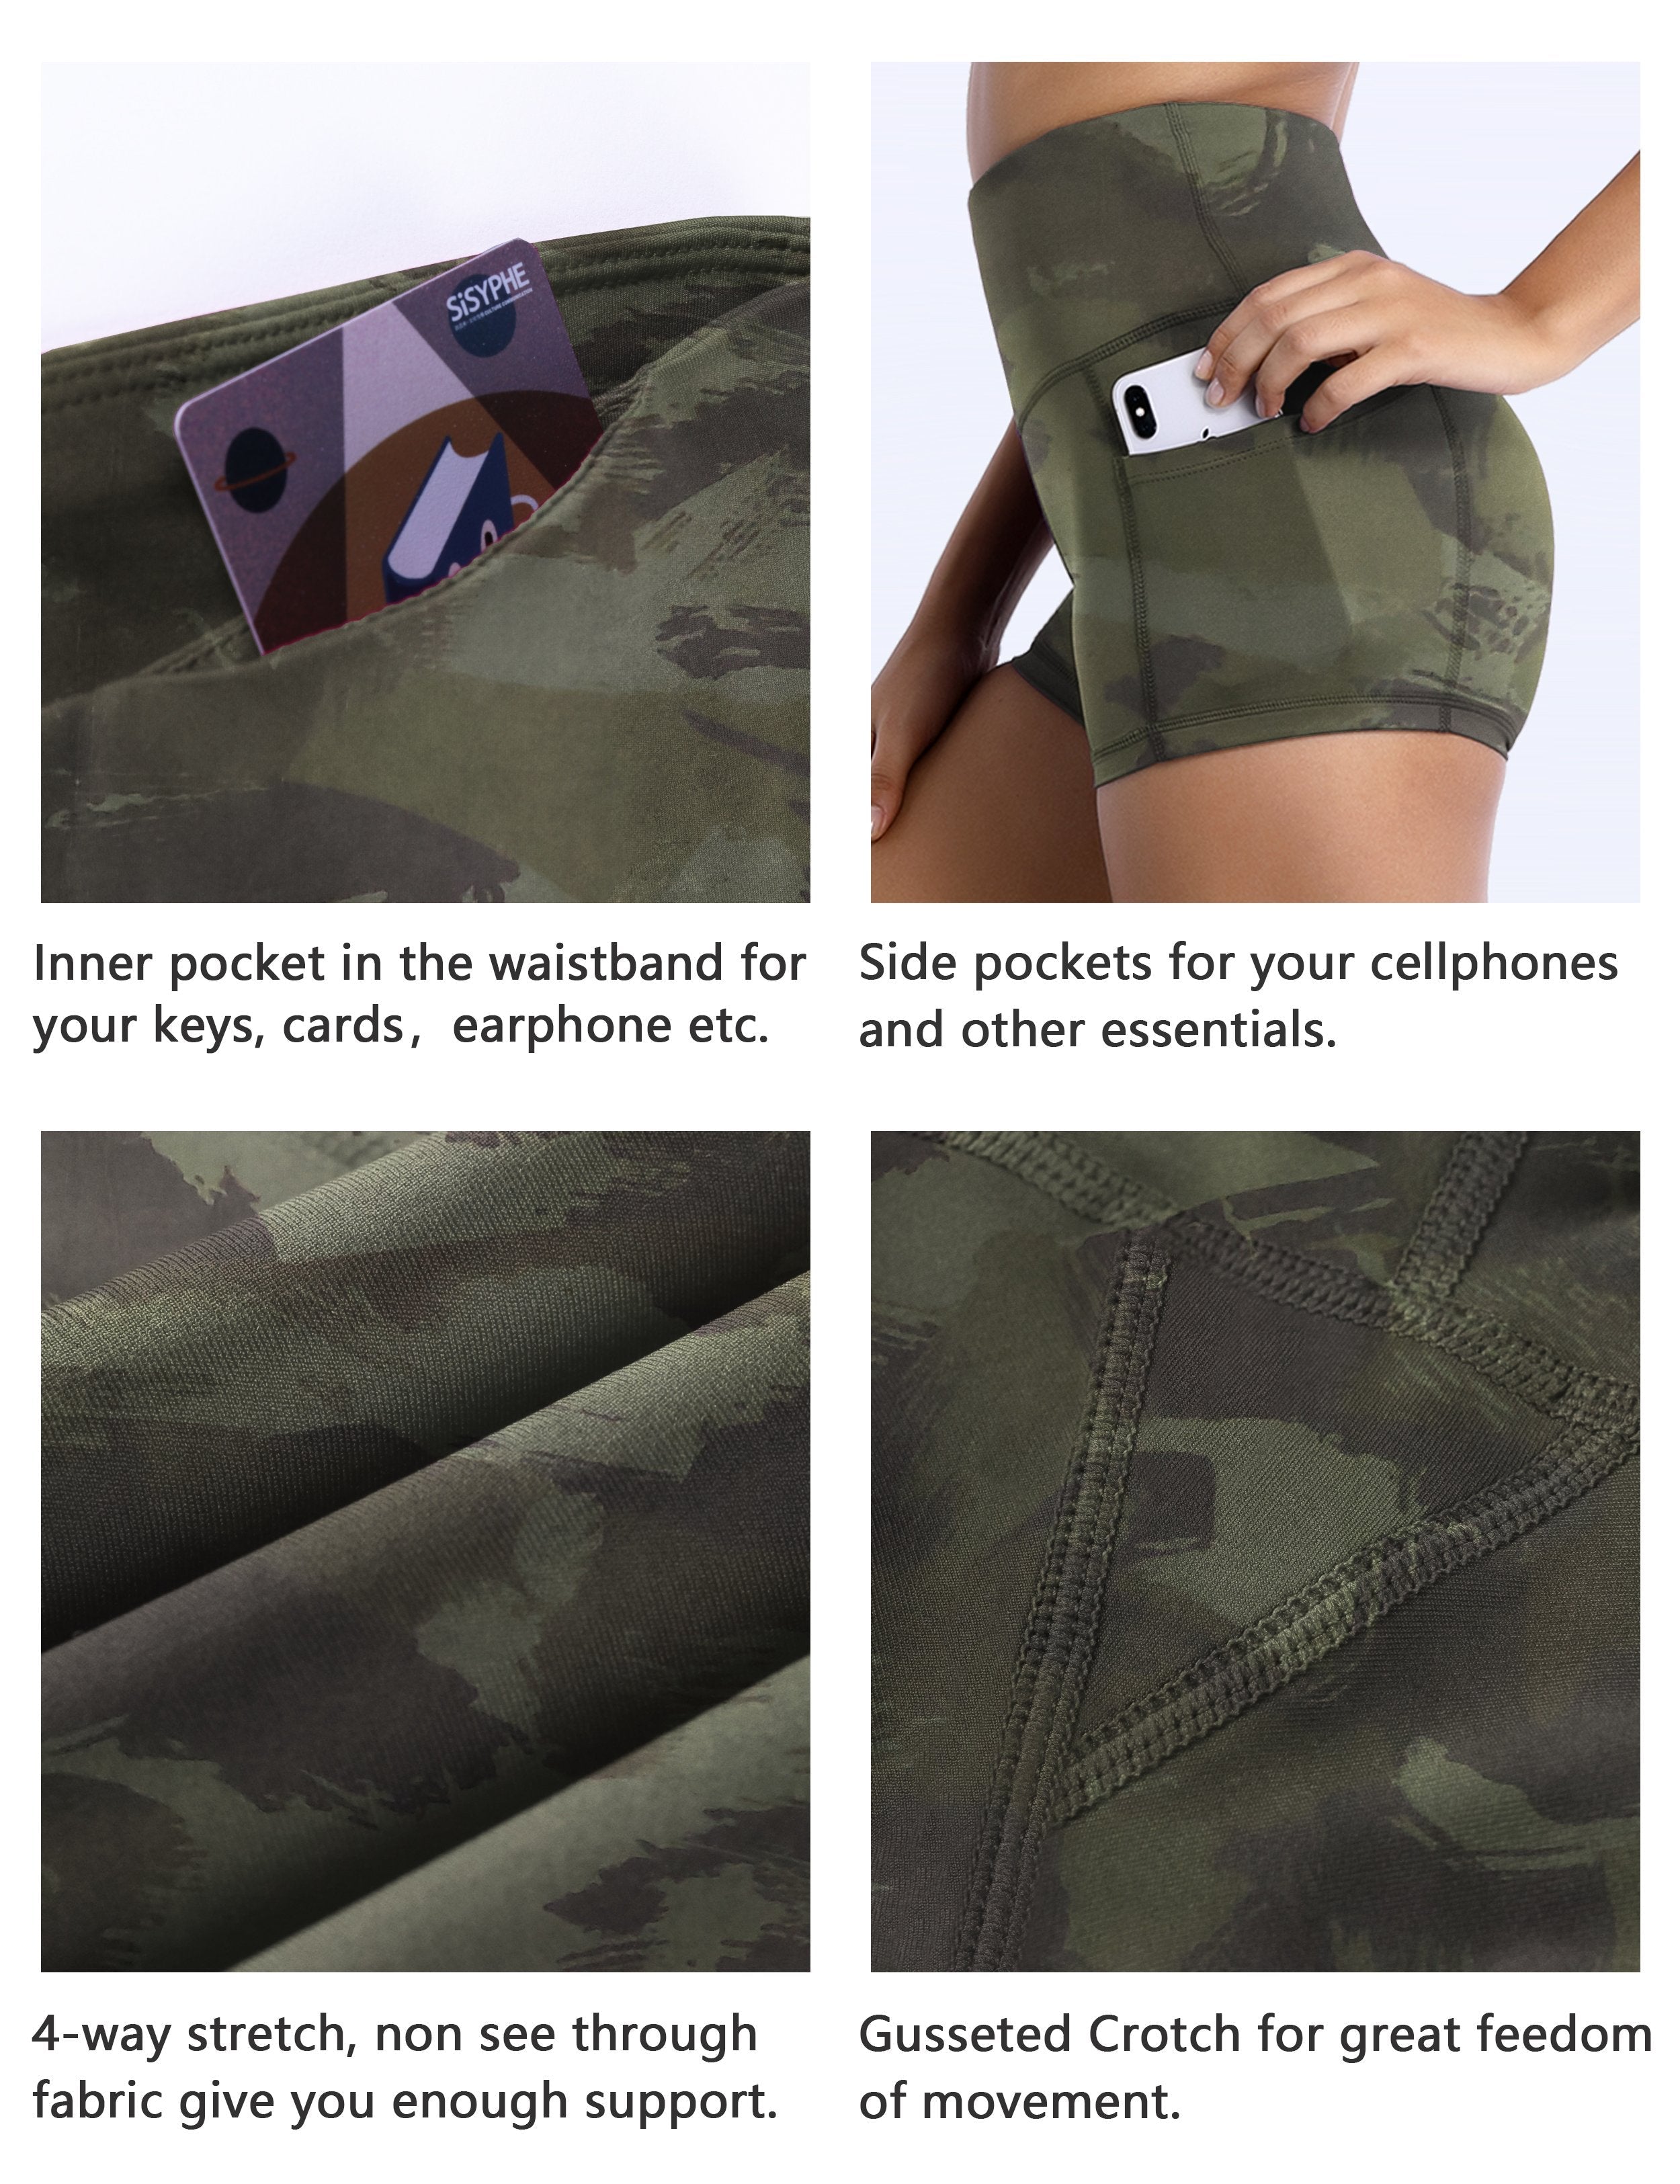 2.5" Printed Side Pockets Running Shorts green brushcamo Sleek, soft, smooth and totally comfortable: our newest sexy style is here. Softest-ever fabric High elasticity High density 4-way stretch Fabric doesn't attract lint easily No see-through Moisture-wicking Machine wash 78% Polyester, 22% Spandex